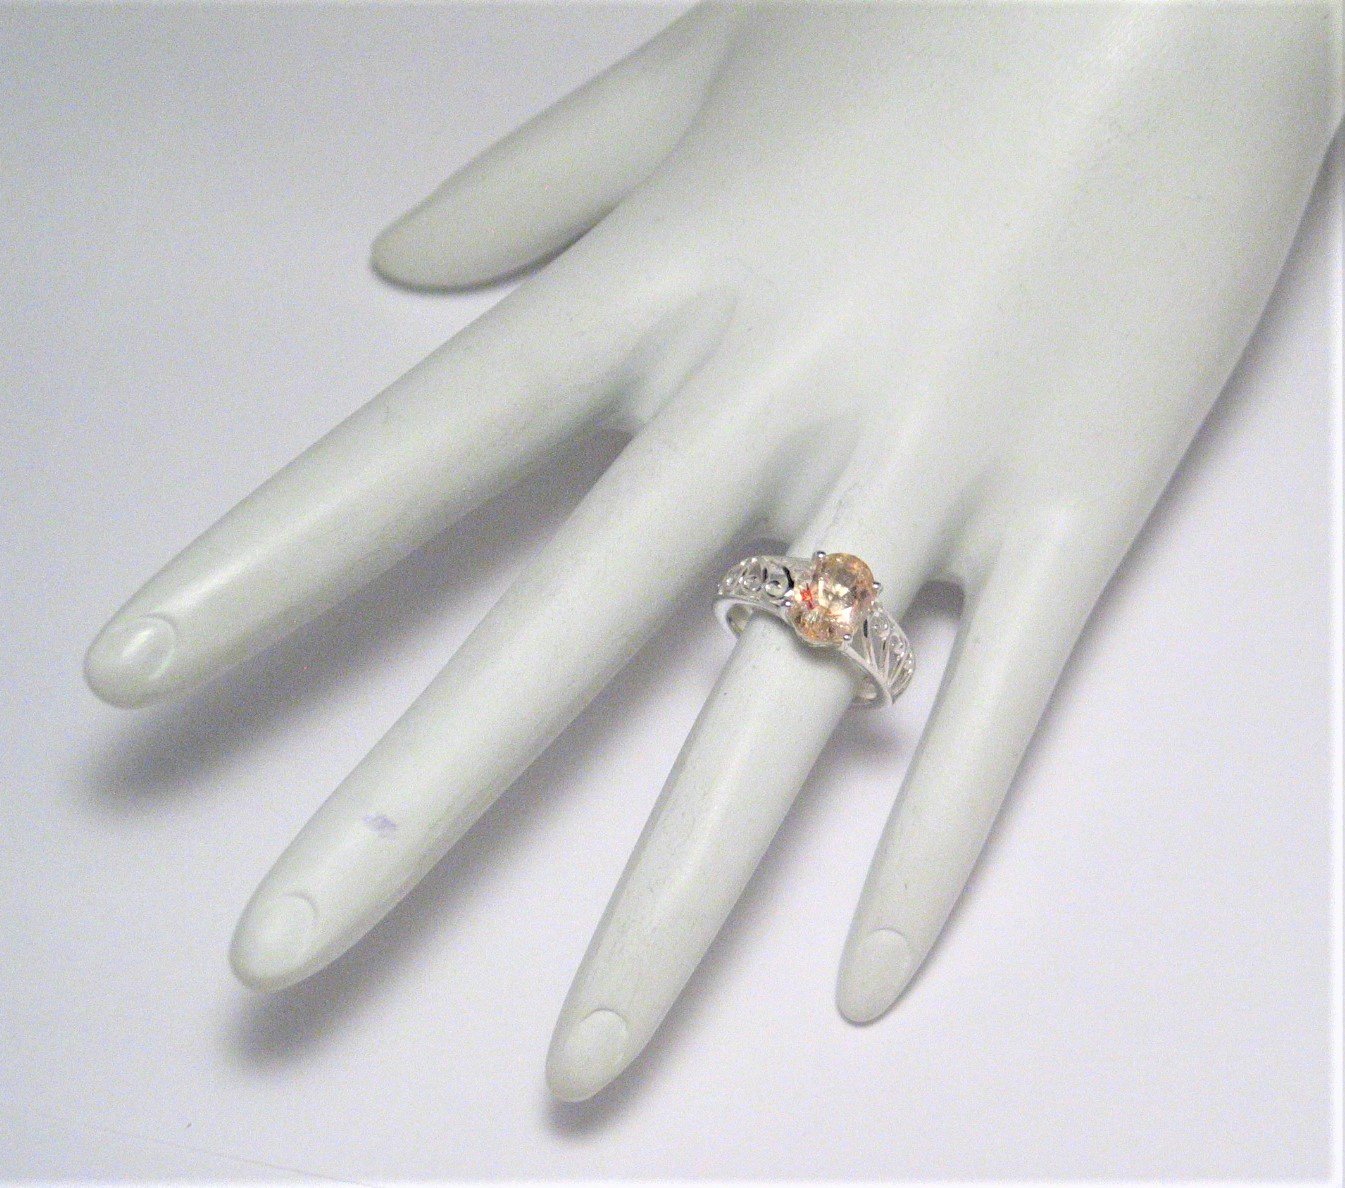 Sterling Silver Ring, Pre-owned sz5.25 Scrolling Design Oval Sunstone Solitaire Ring